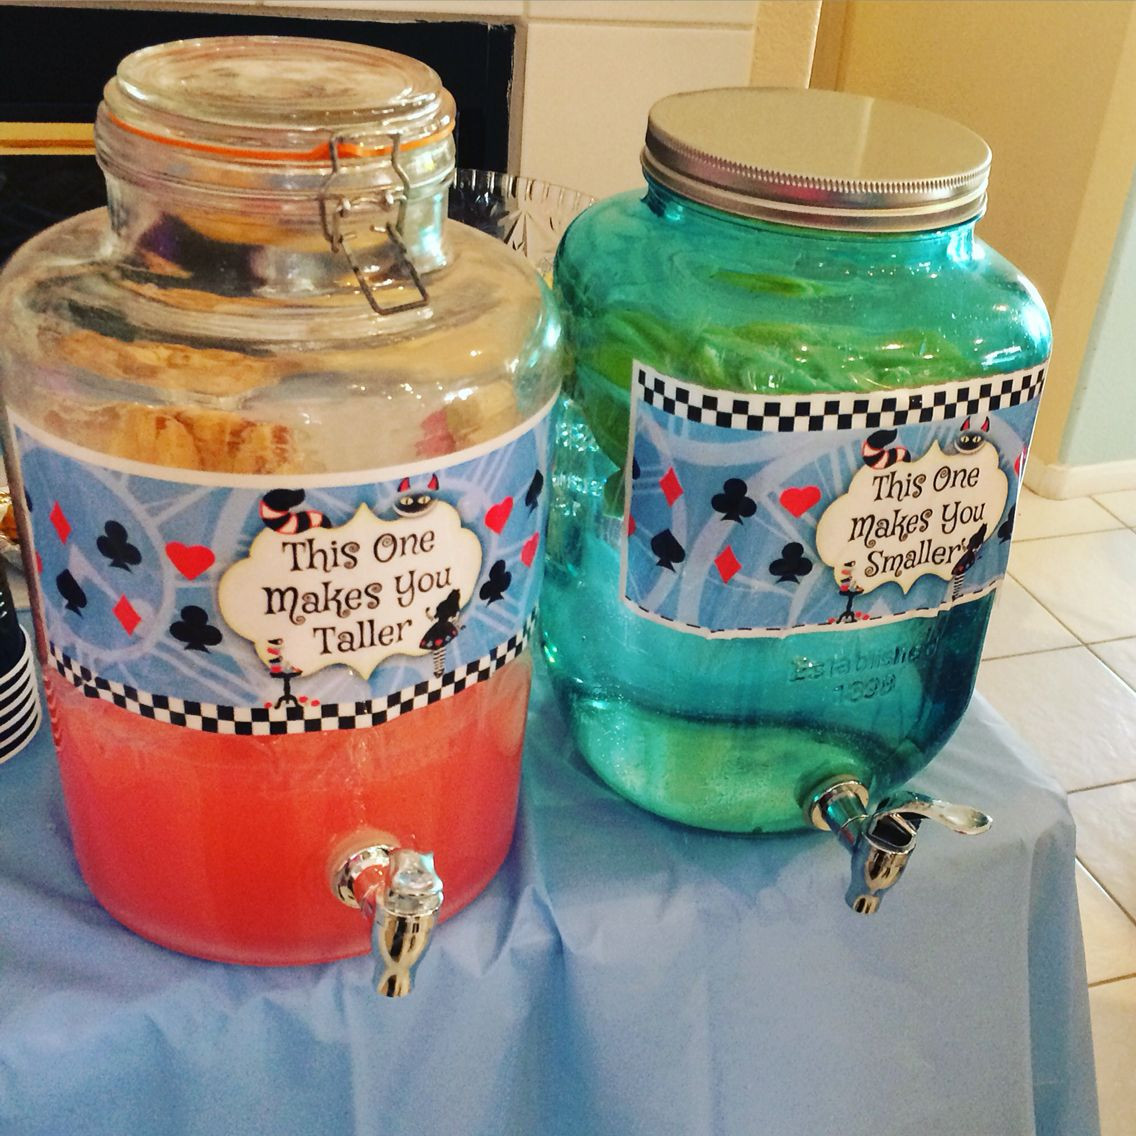 Mad Hatter Themed Tea Party Food Ideas
 Alice in Wonderland Mad Hatter tea party in 2019